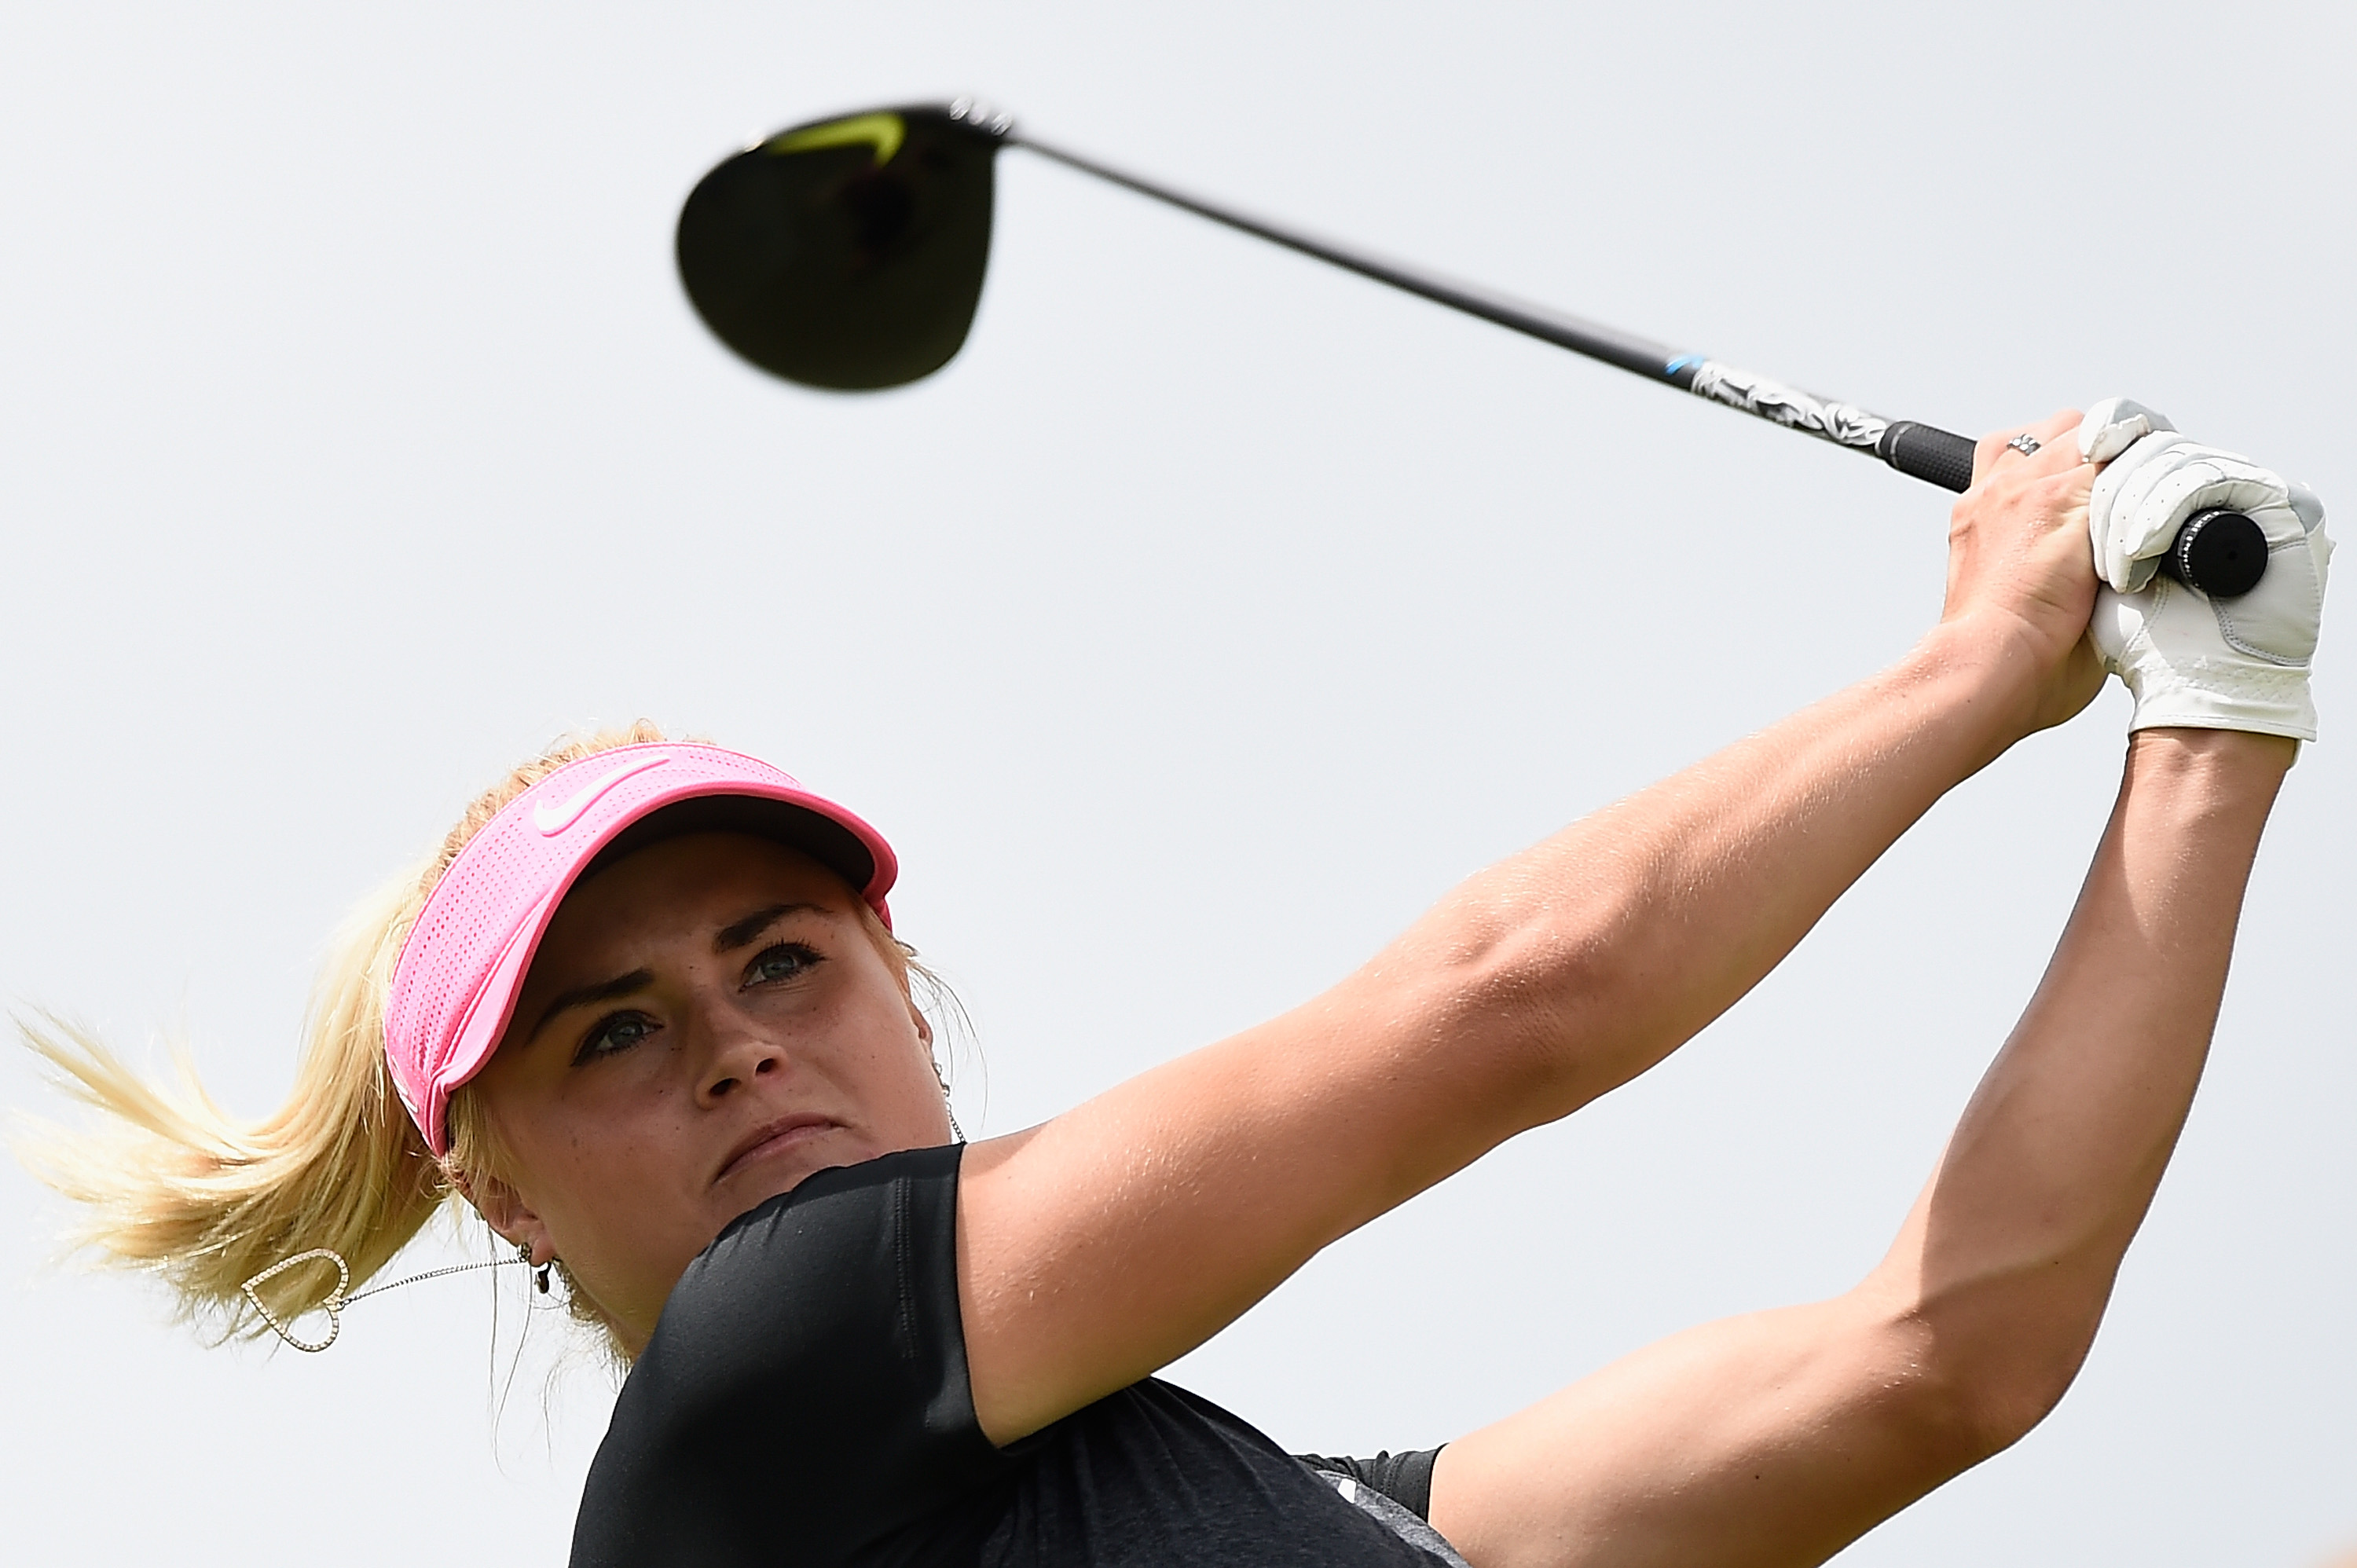 Carly Booth's US Open date a sign of upward path again at last